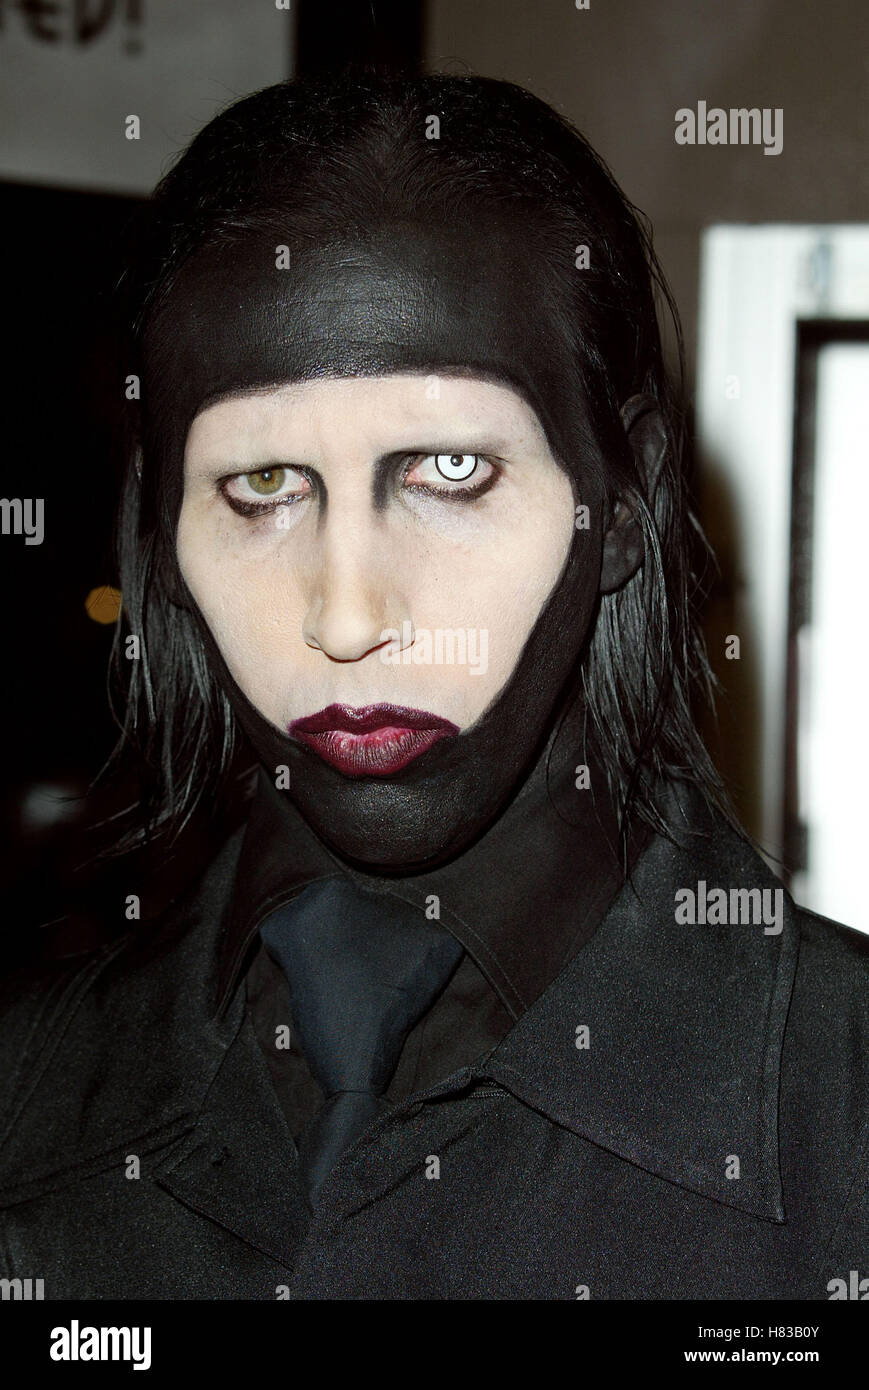 MARILYN MANSON RESIDENT EVIL FILM PREMIERE HOLLYWOOD LOS ANGELES USA 12 March 2002 Stock Photo